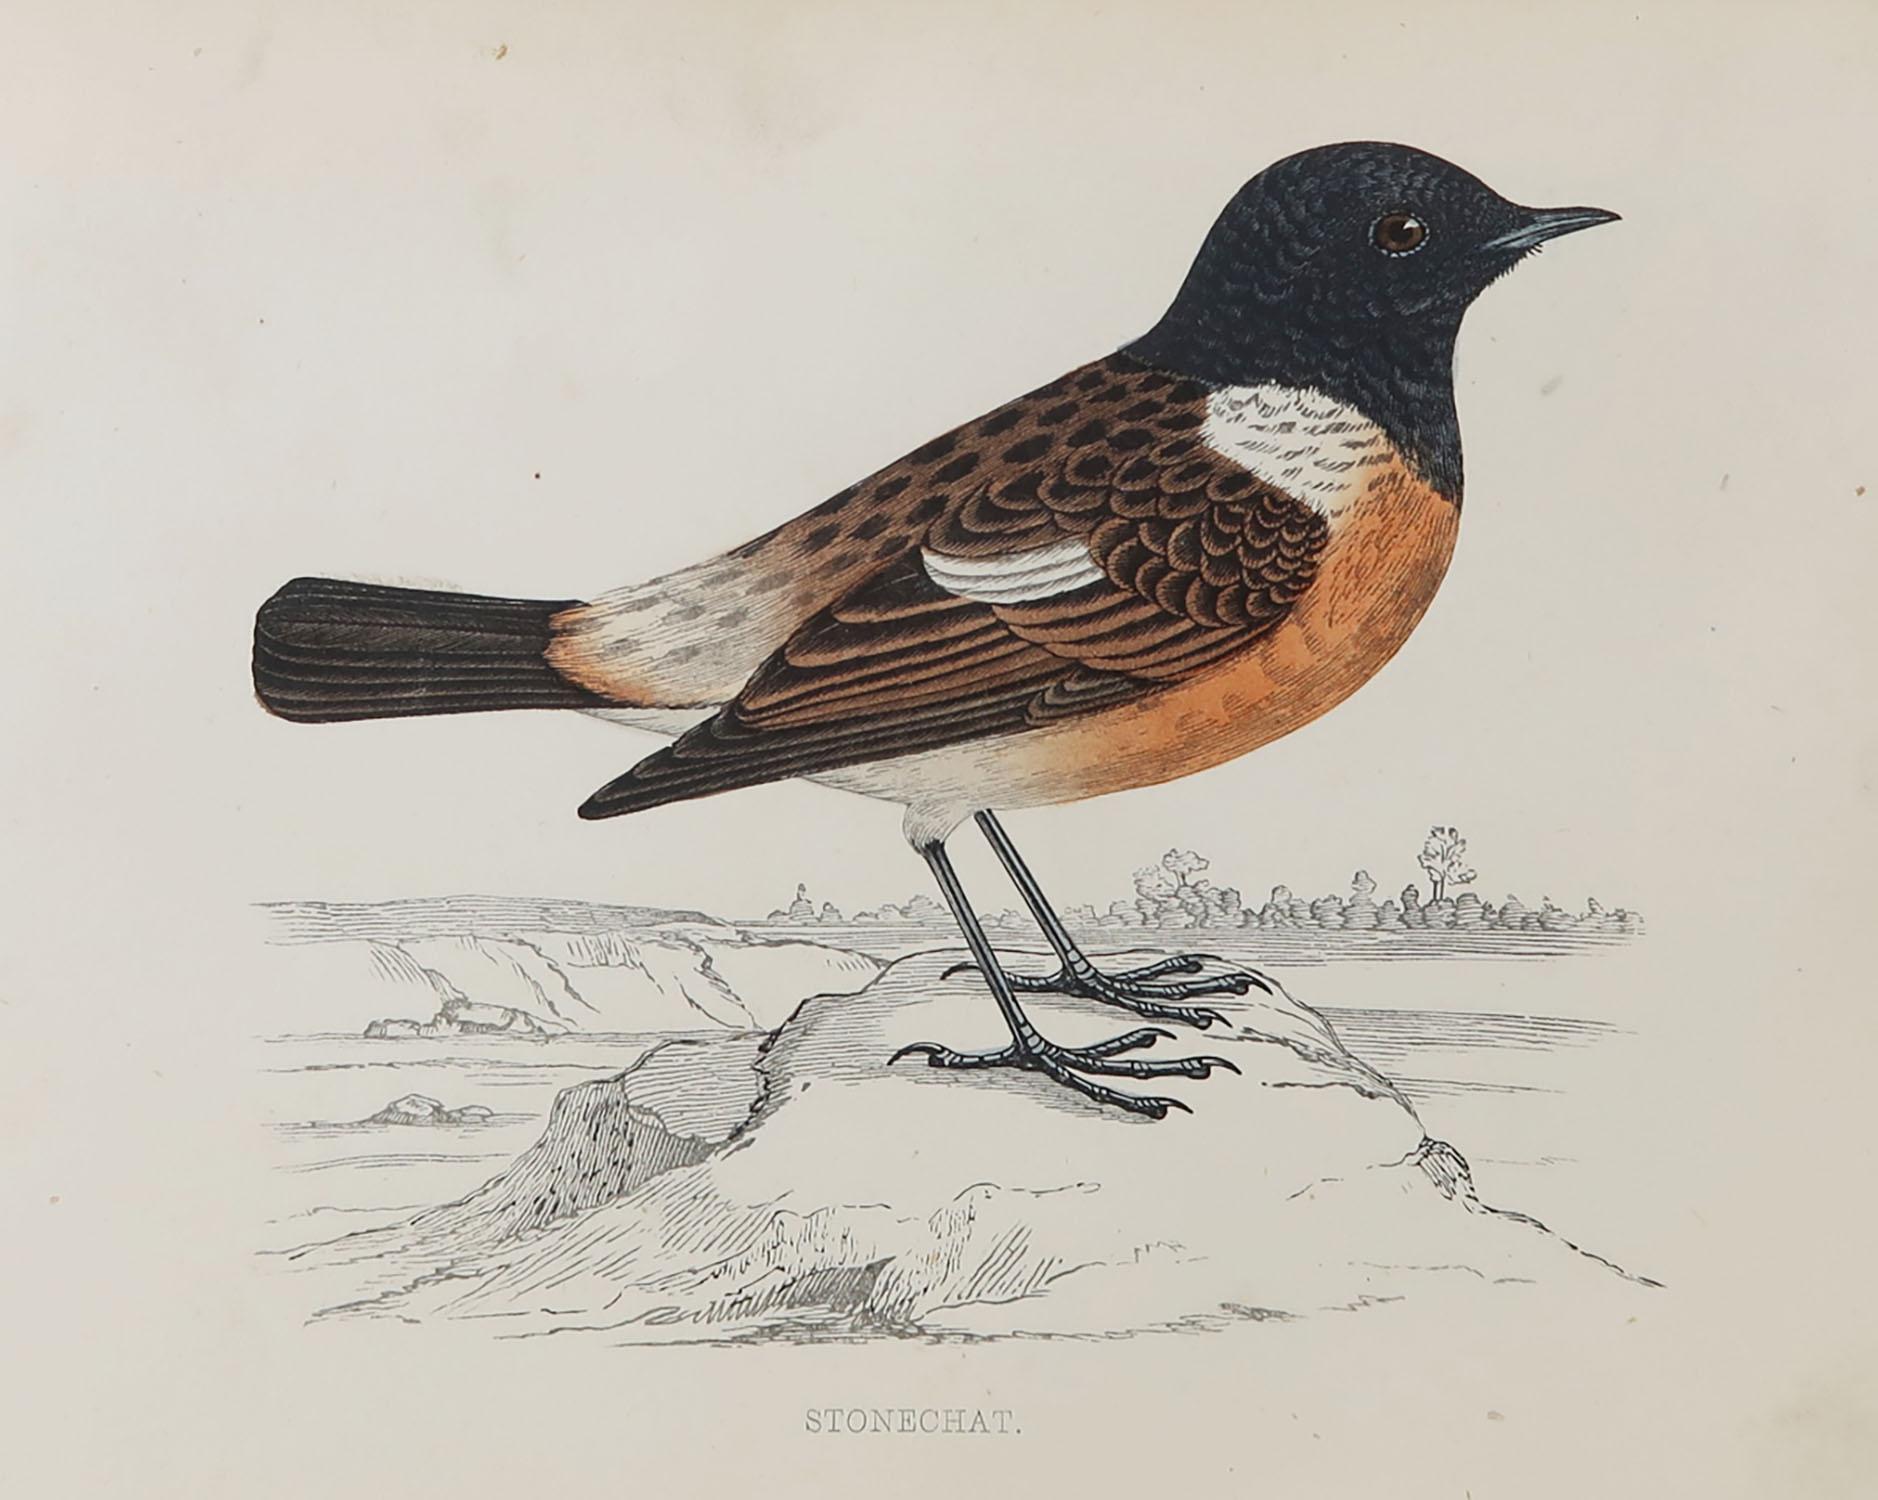 Great image of a stonechat

Unframed. It gives you the option of perhaps making a set up using your own choice of frames.

Lithograph with original hand color.

Published, circa 1870

Free shipping.




